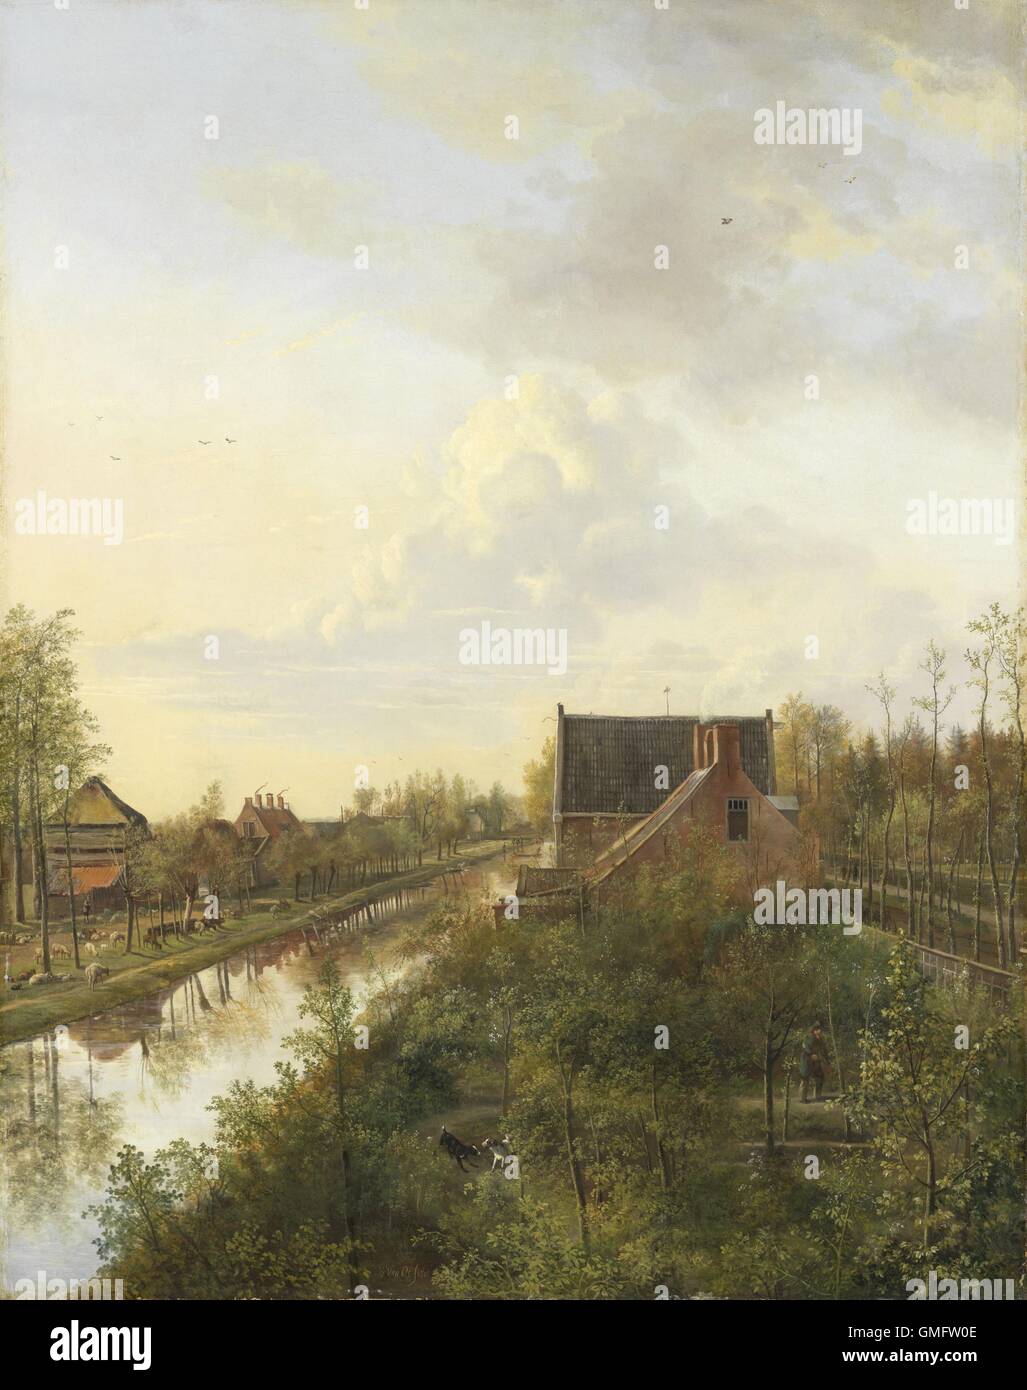 The Canal at ’s-Graveland, by Pieter Gerardus van Os, 1818, Dutch painting, oil on canvas. Van Os painted this scene from a window in a multi-storied tall building. From the high point he developed a highly detailed painting of the Dutch village. (BSLOC 2016 1 197) Stock Photo